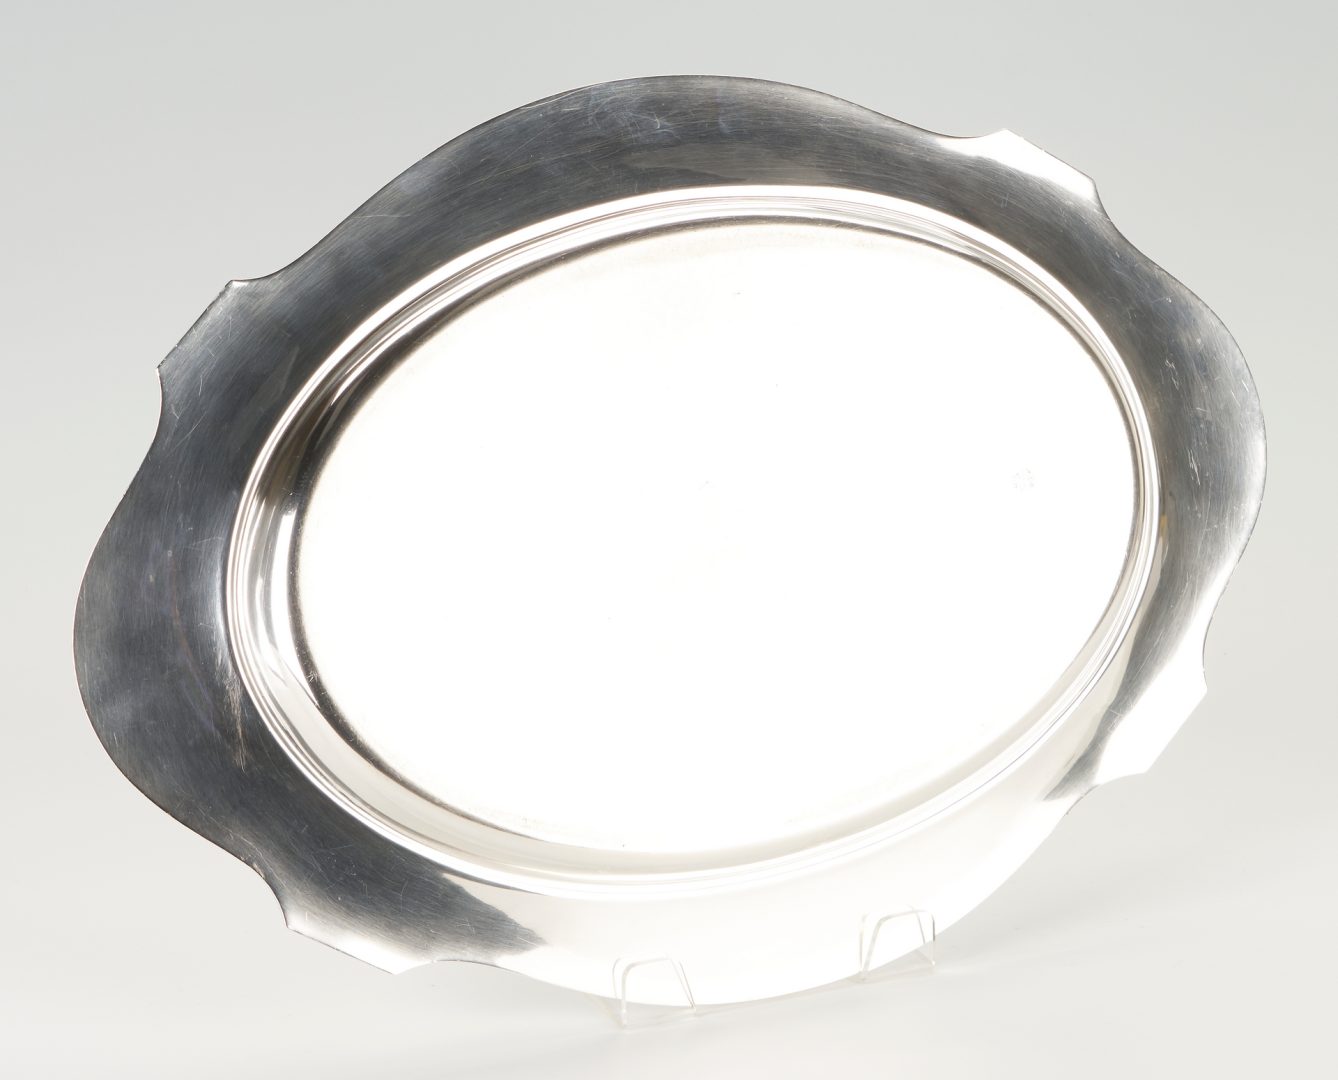 Lot 434: Large Gorham Sterling Silver Oval Tray, 65 oz, inscribed